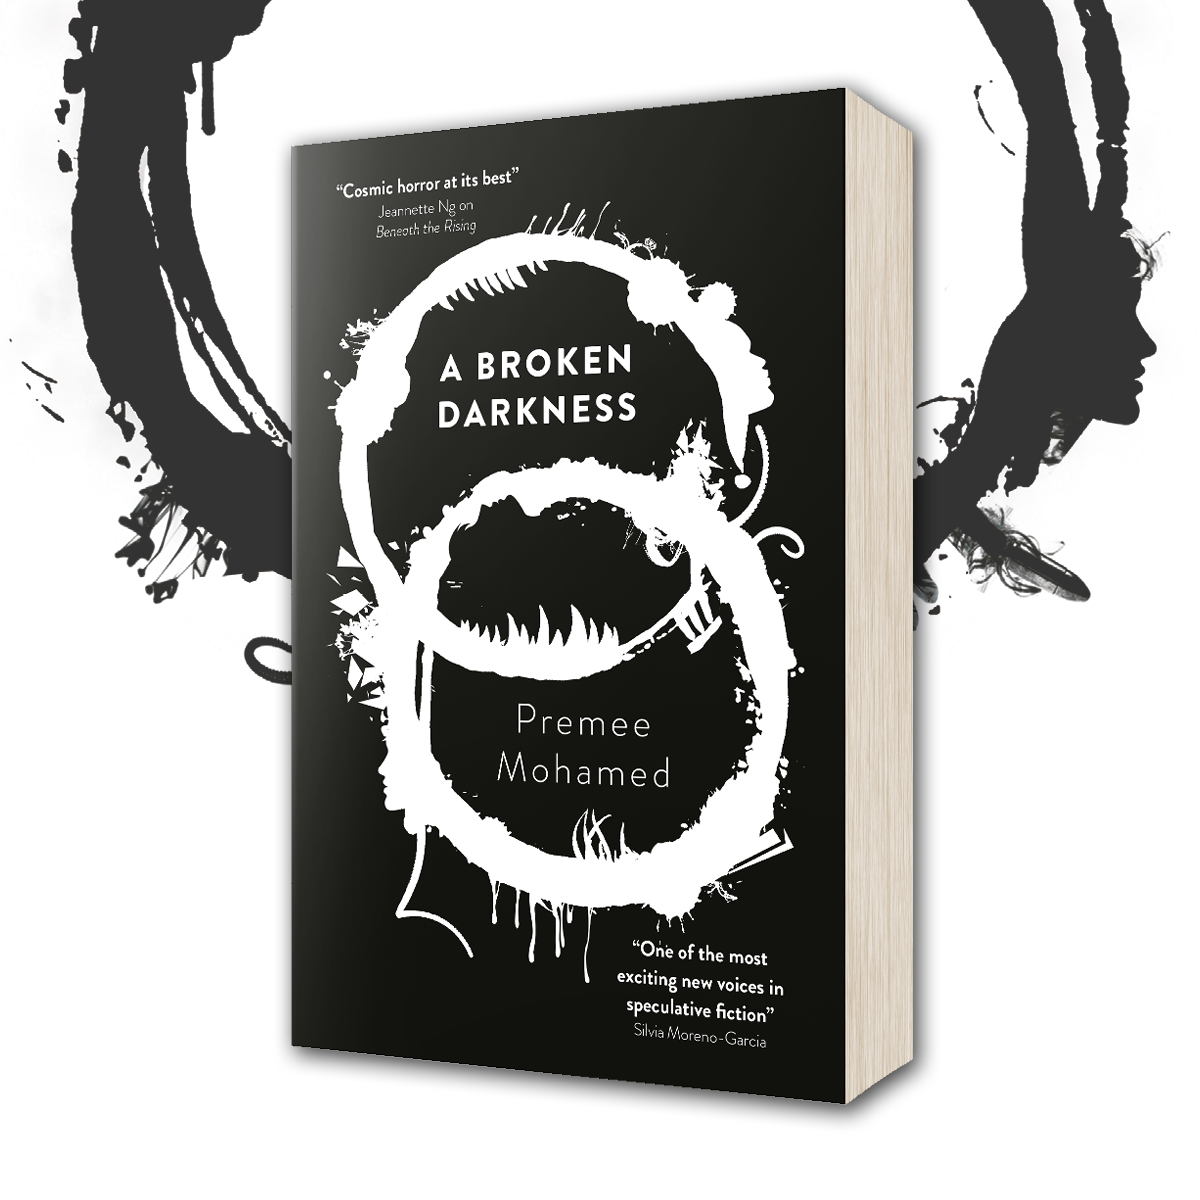 Image featuring a 3D paperback copy of Broken Darkness by Premee Mohamed